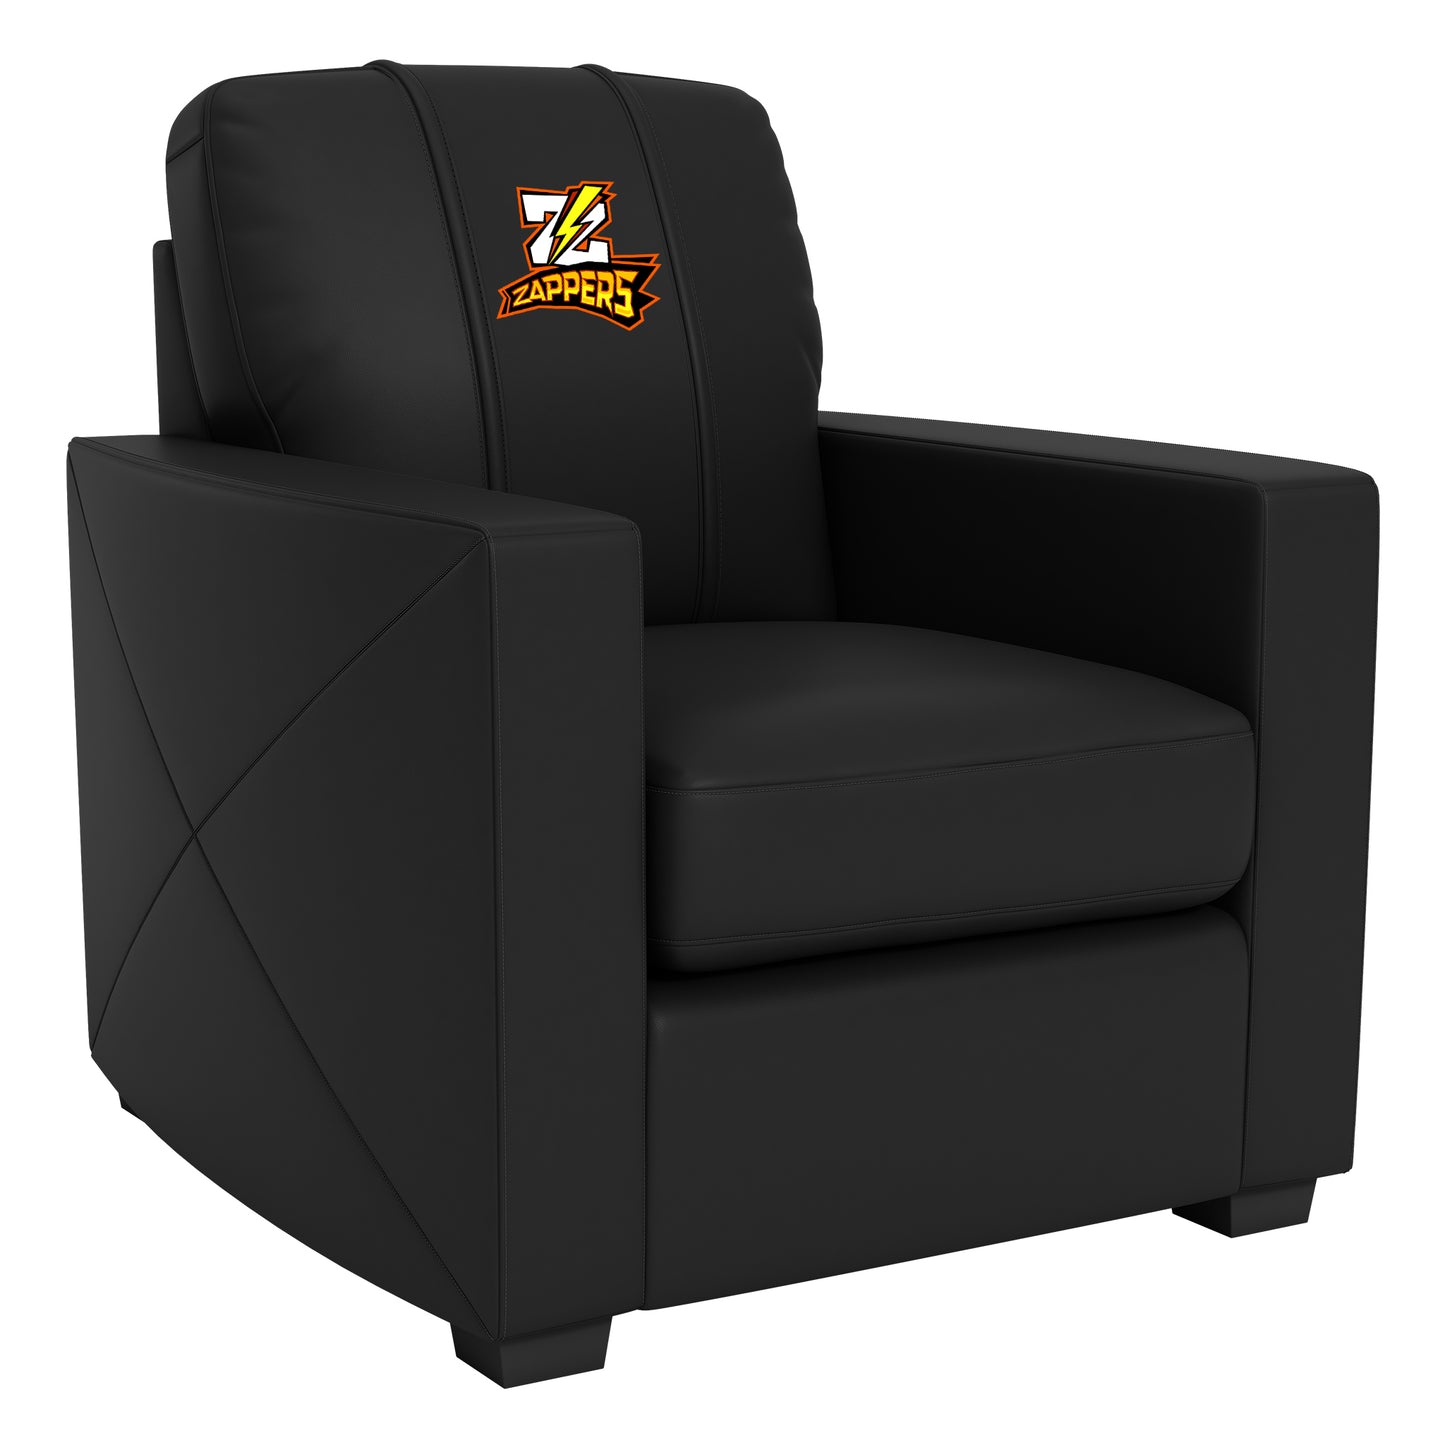 Silver Club Chair with Zappers Logo